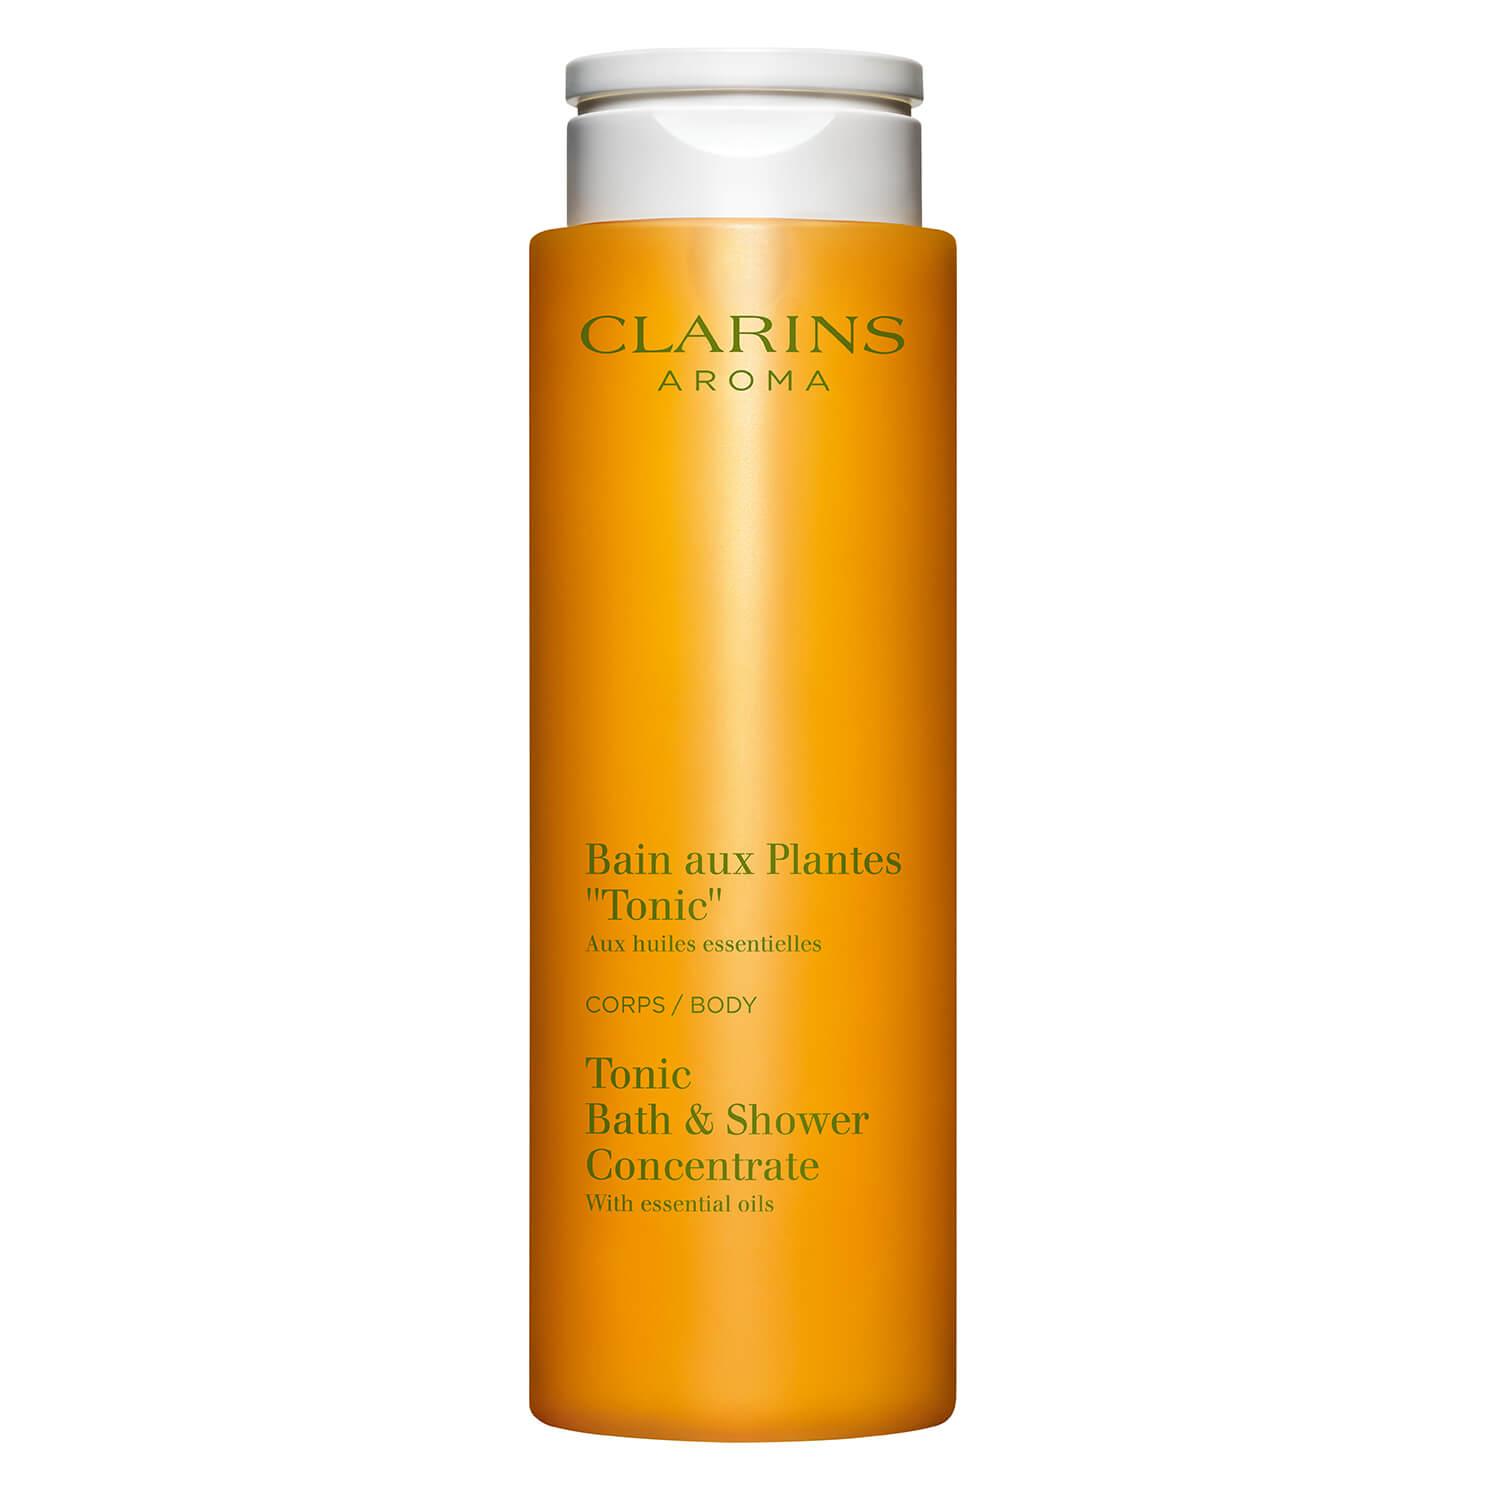 Clarins Body - Tonic Bath & Shower Concentrate